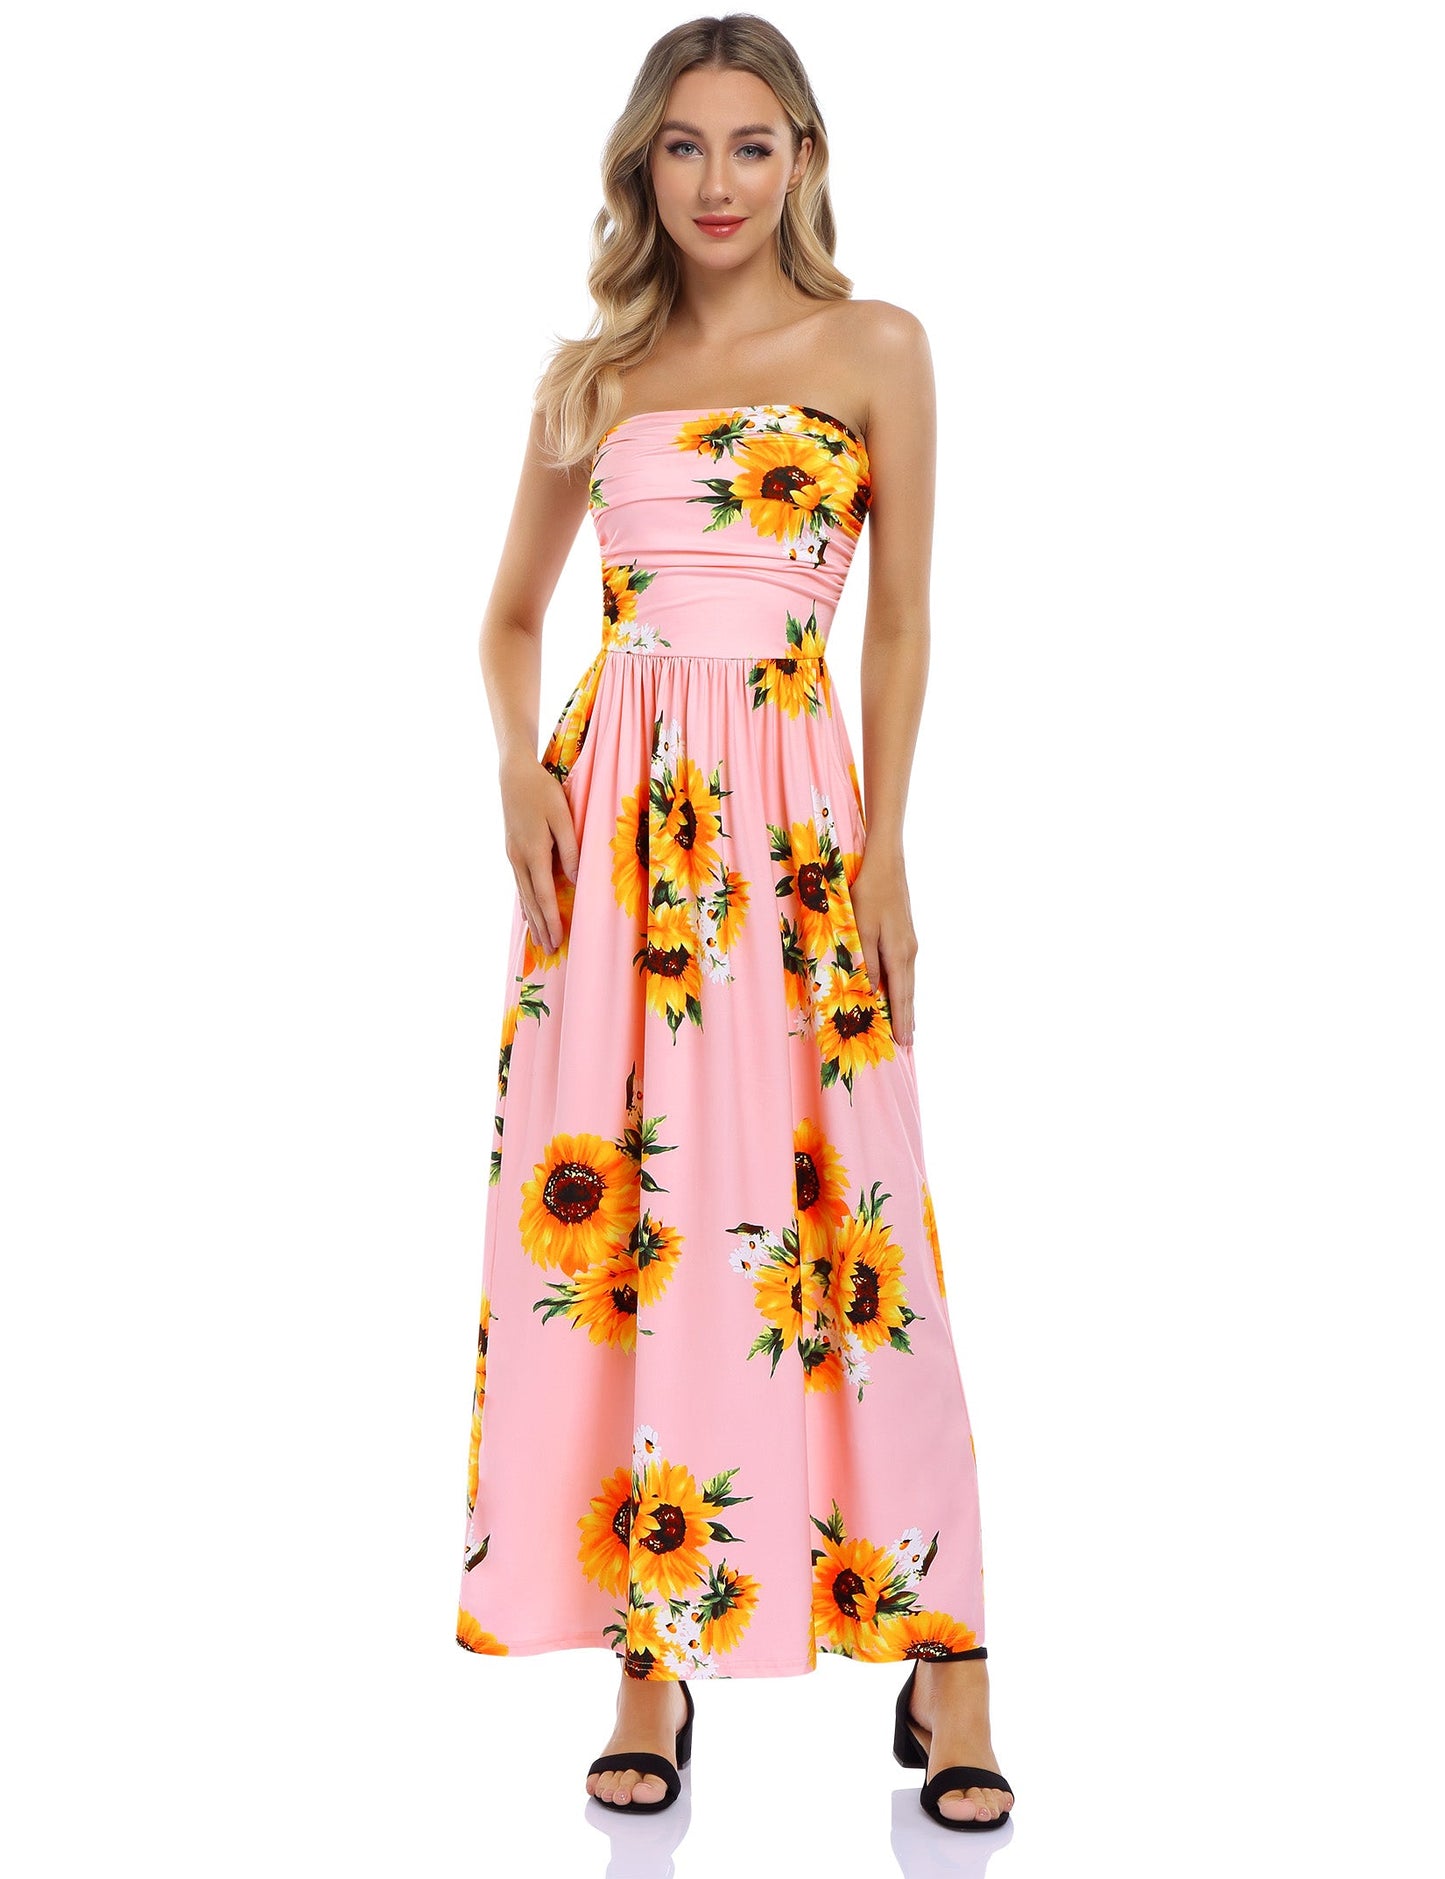 YESFASHION Women's Strapless Graceful Floral Party Maxi Long Dress Pineapple flower